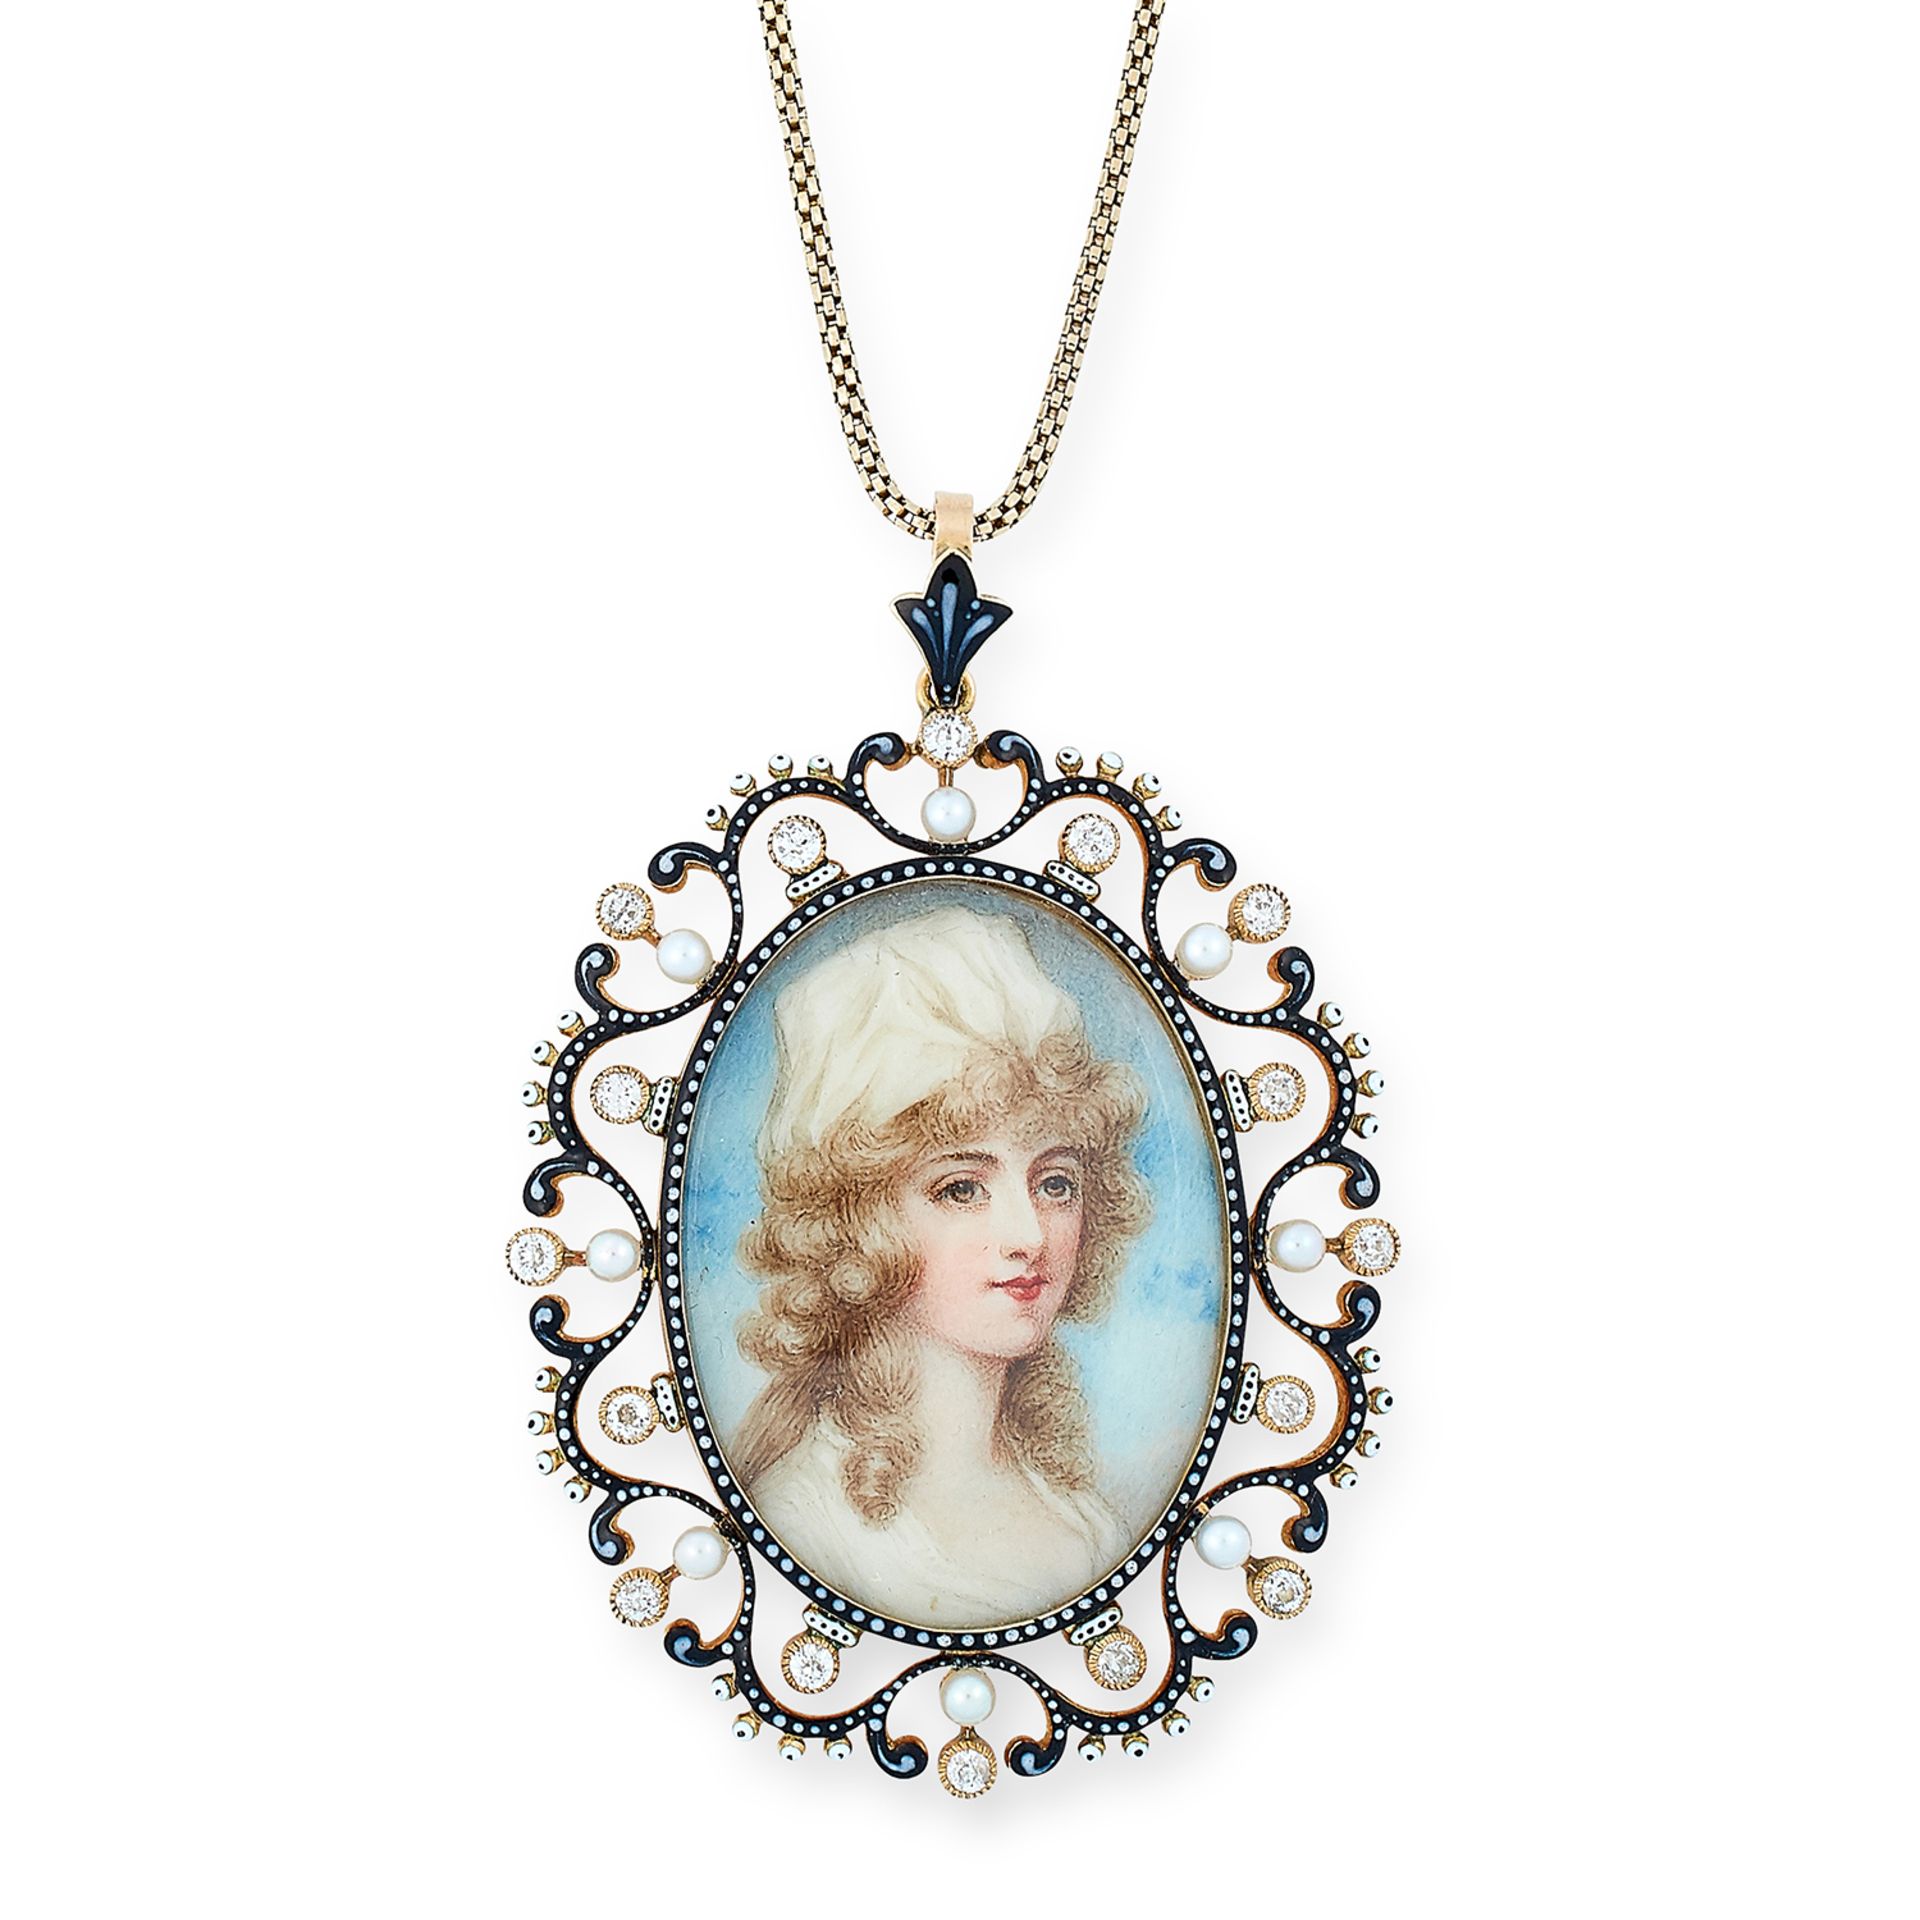 AN ANTIQUE PORTRAIT MINIATURE PENDANT NECKLACE set with a painted miniature of a lady in a border